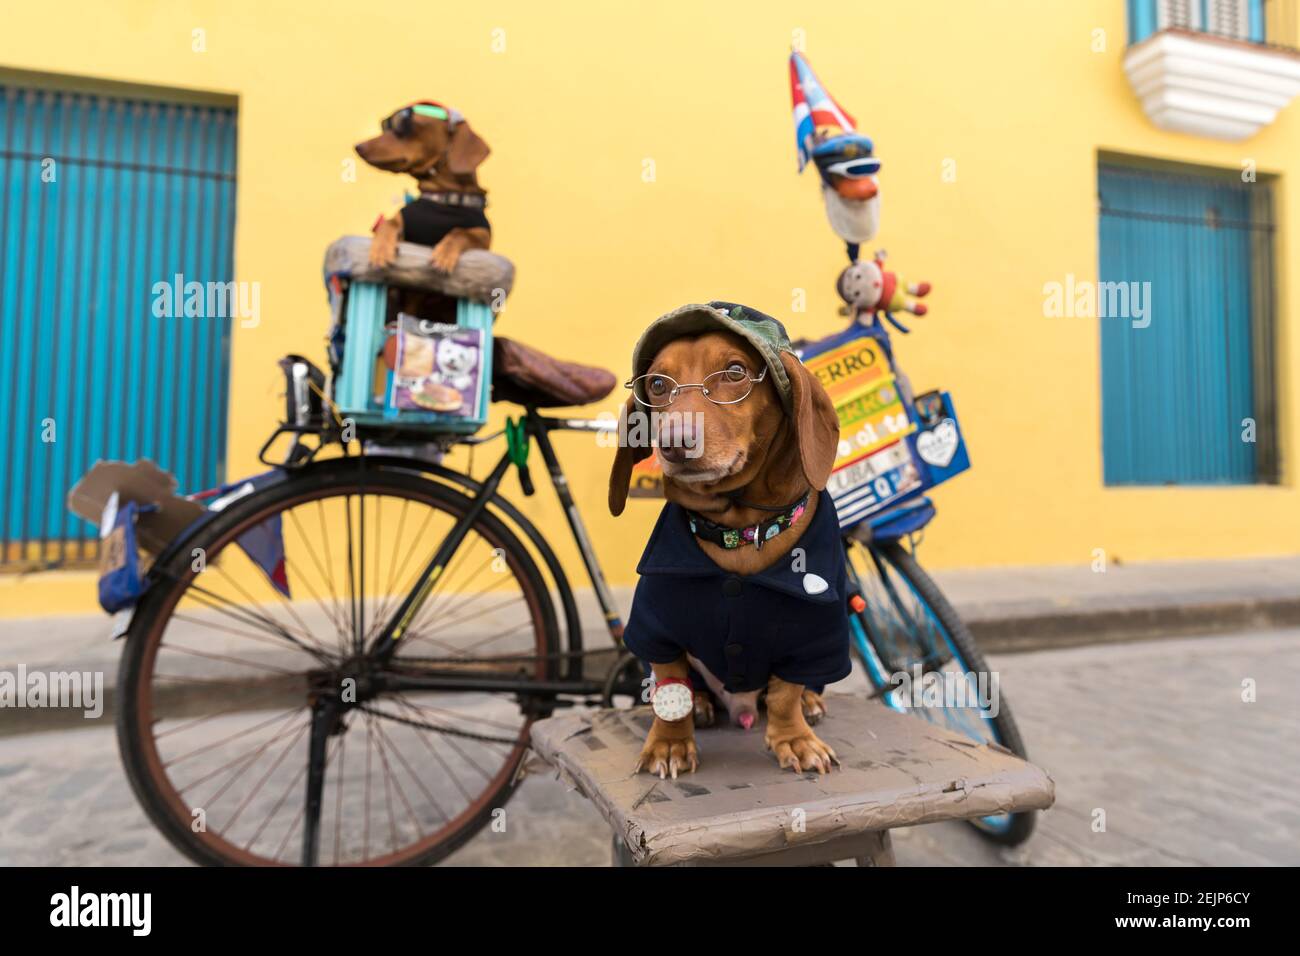 Funny photo of two dachshunds dressed and wearing glasses in Cuba. Stock Photo